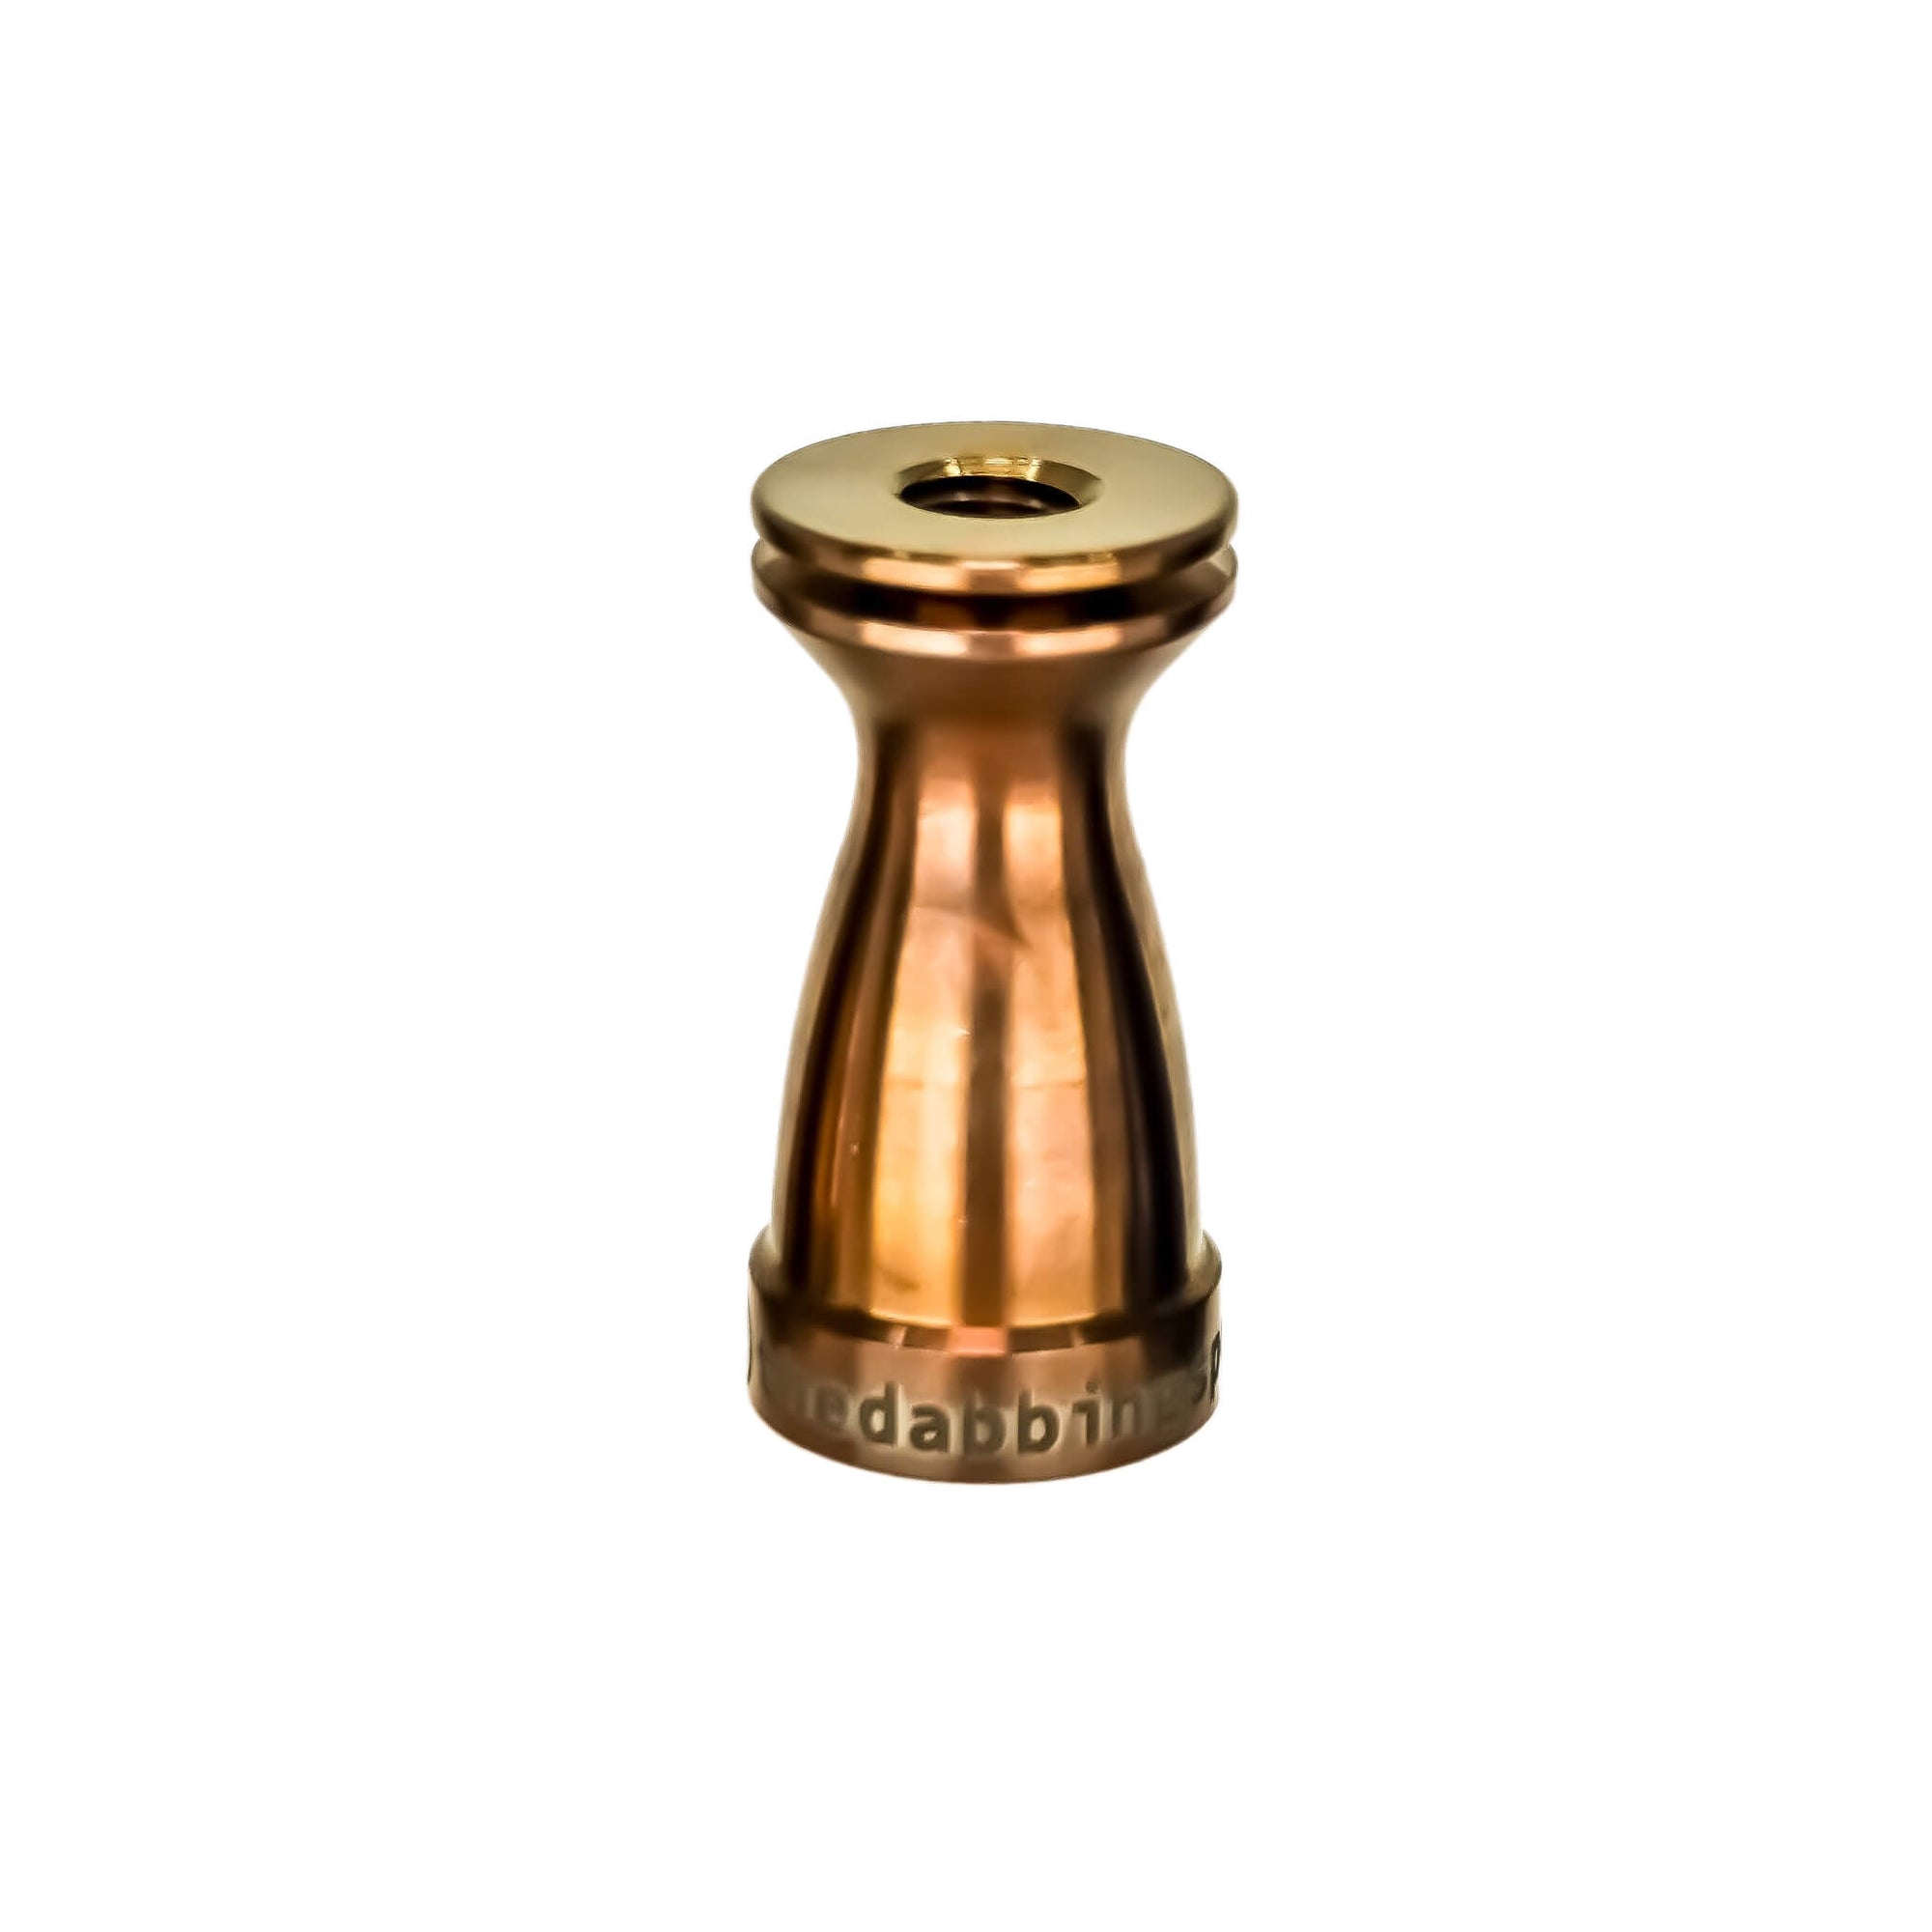 Titanium Female Nail Body 14mm, 10mm | Anodized Amber Profile View | the dabbing specialists